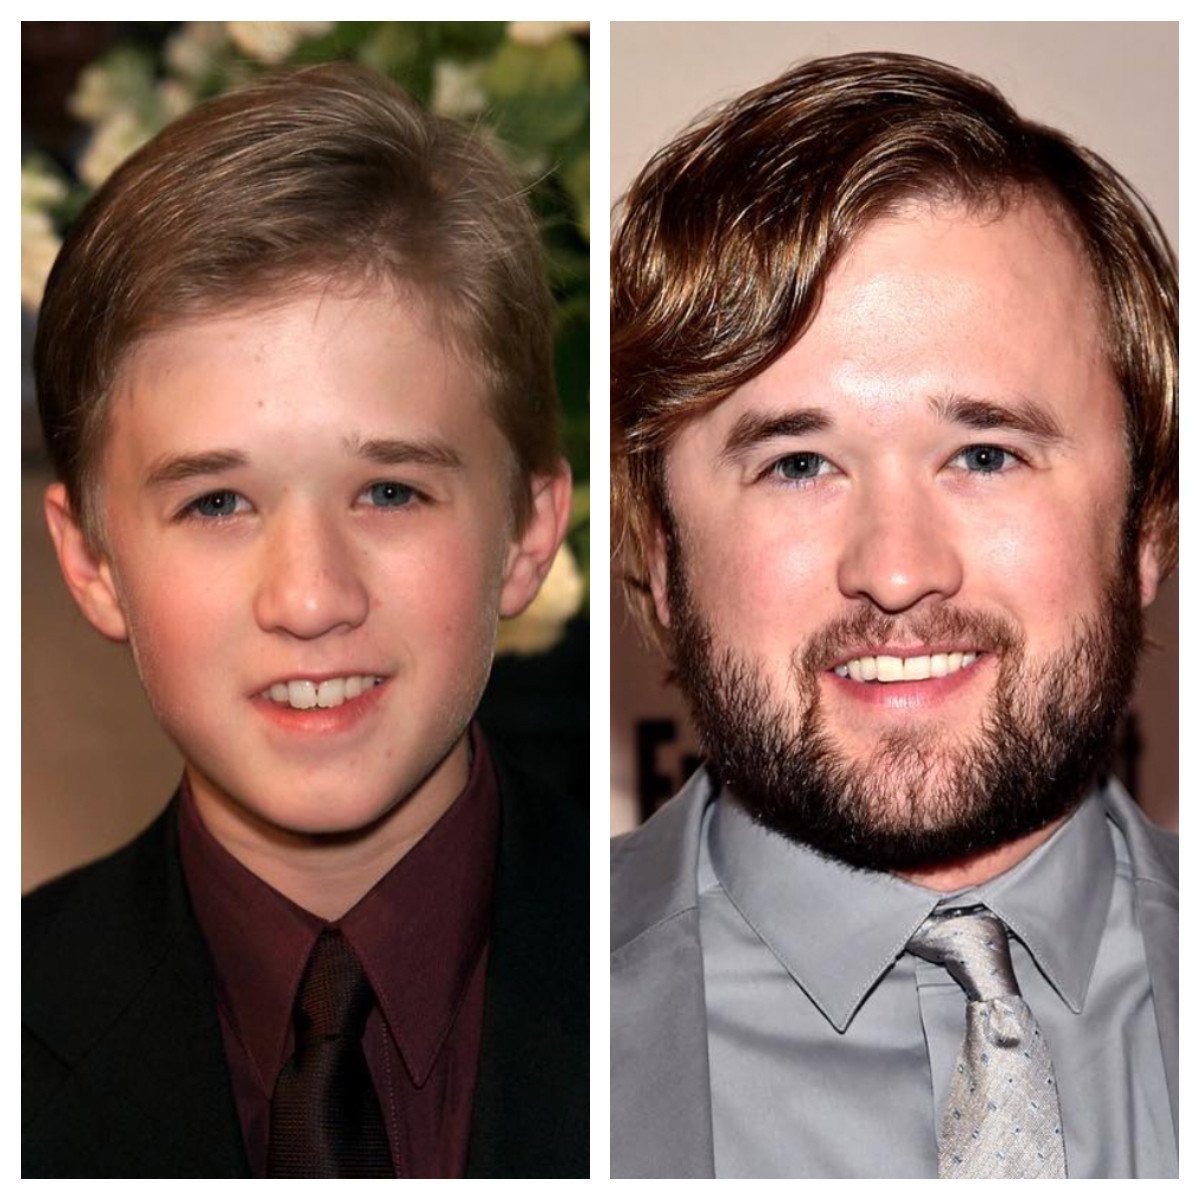 Then and now: Haley Joel Osment, the child star of The Sixth Sense and Forrest Gump, steered clear of the child-star tropes that afflicted everyone from Britney Spears to Justin Bieber and Lindsay Lohan. Photo: @moviepilot_de/Instagram